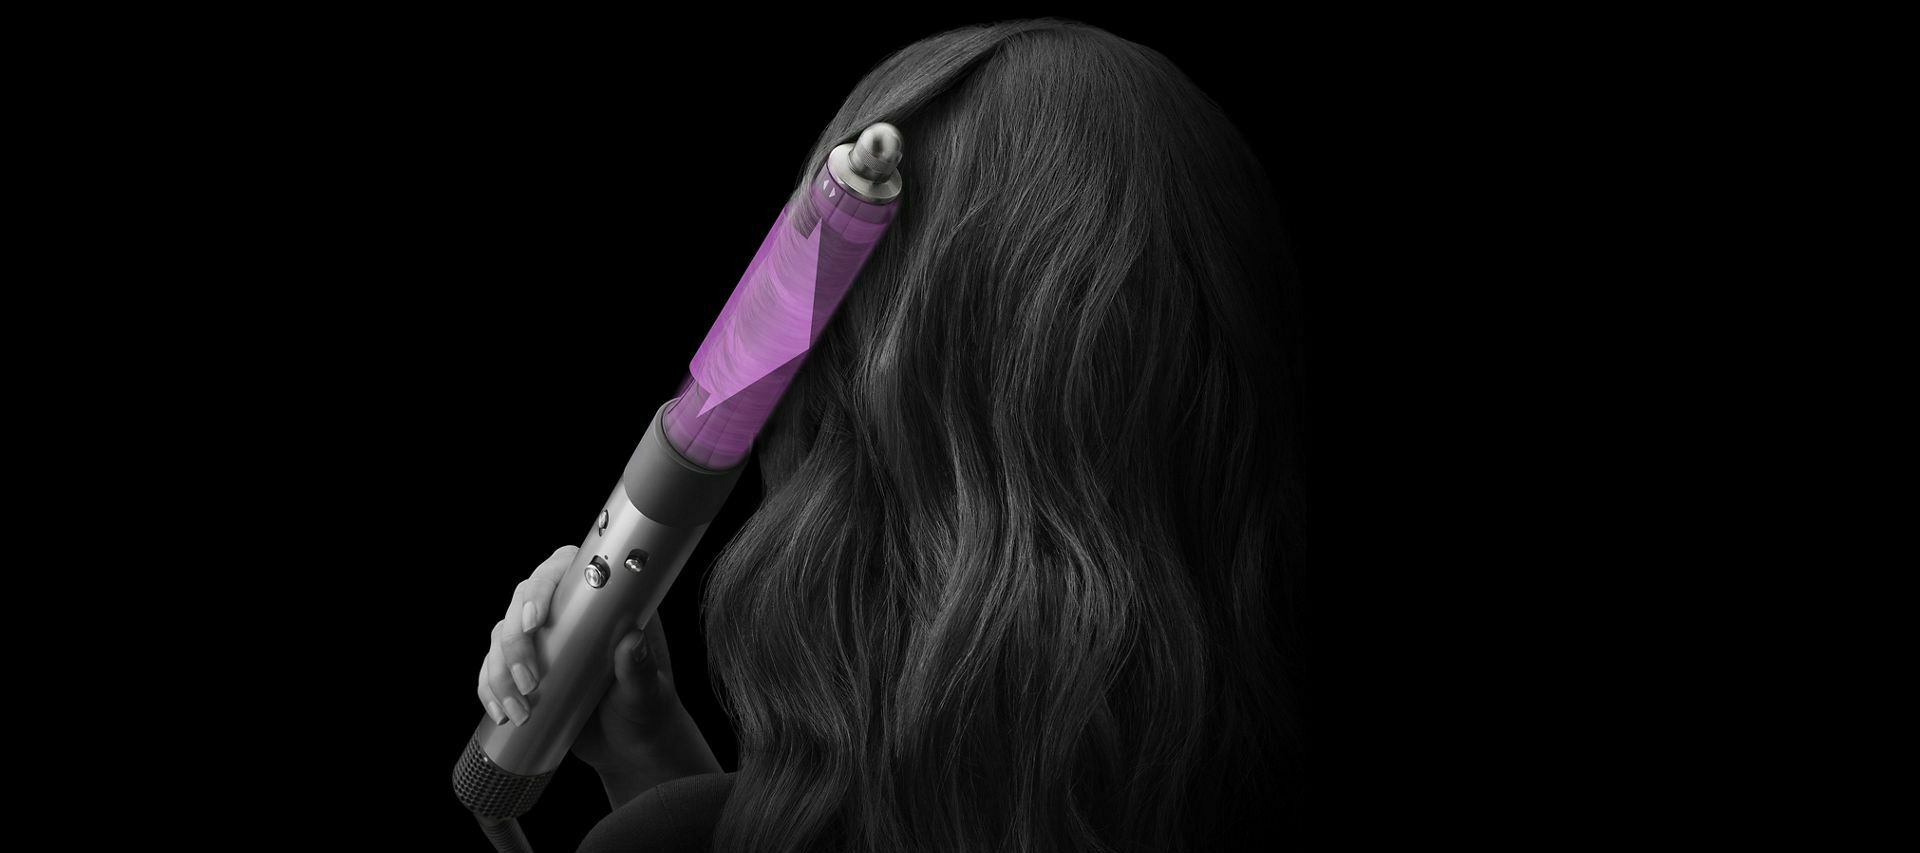 Dyson Airwrap™ multi-styler: Golden rules for curl retention